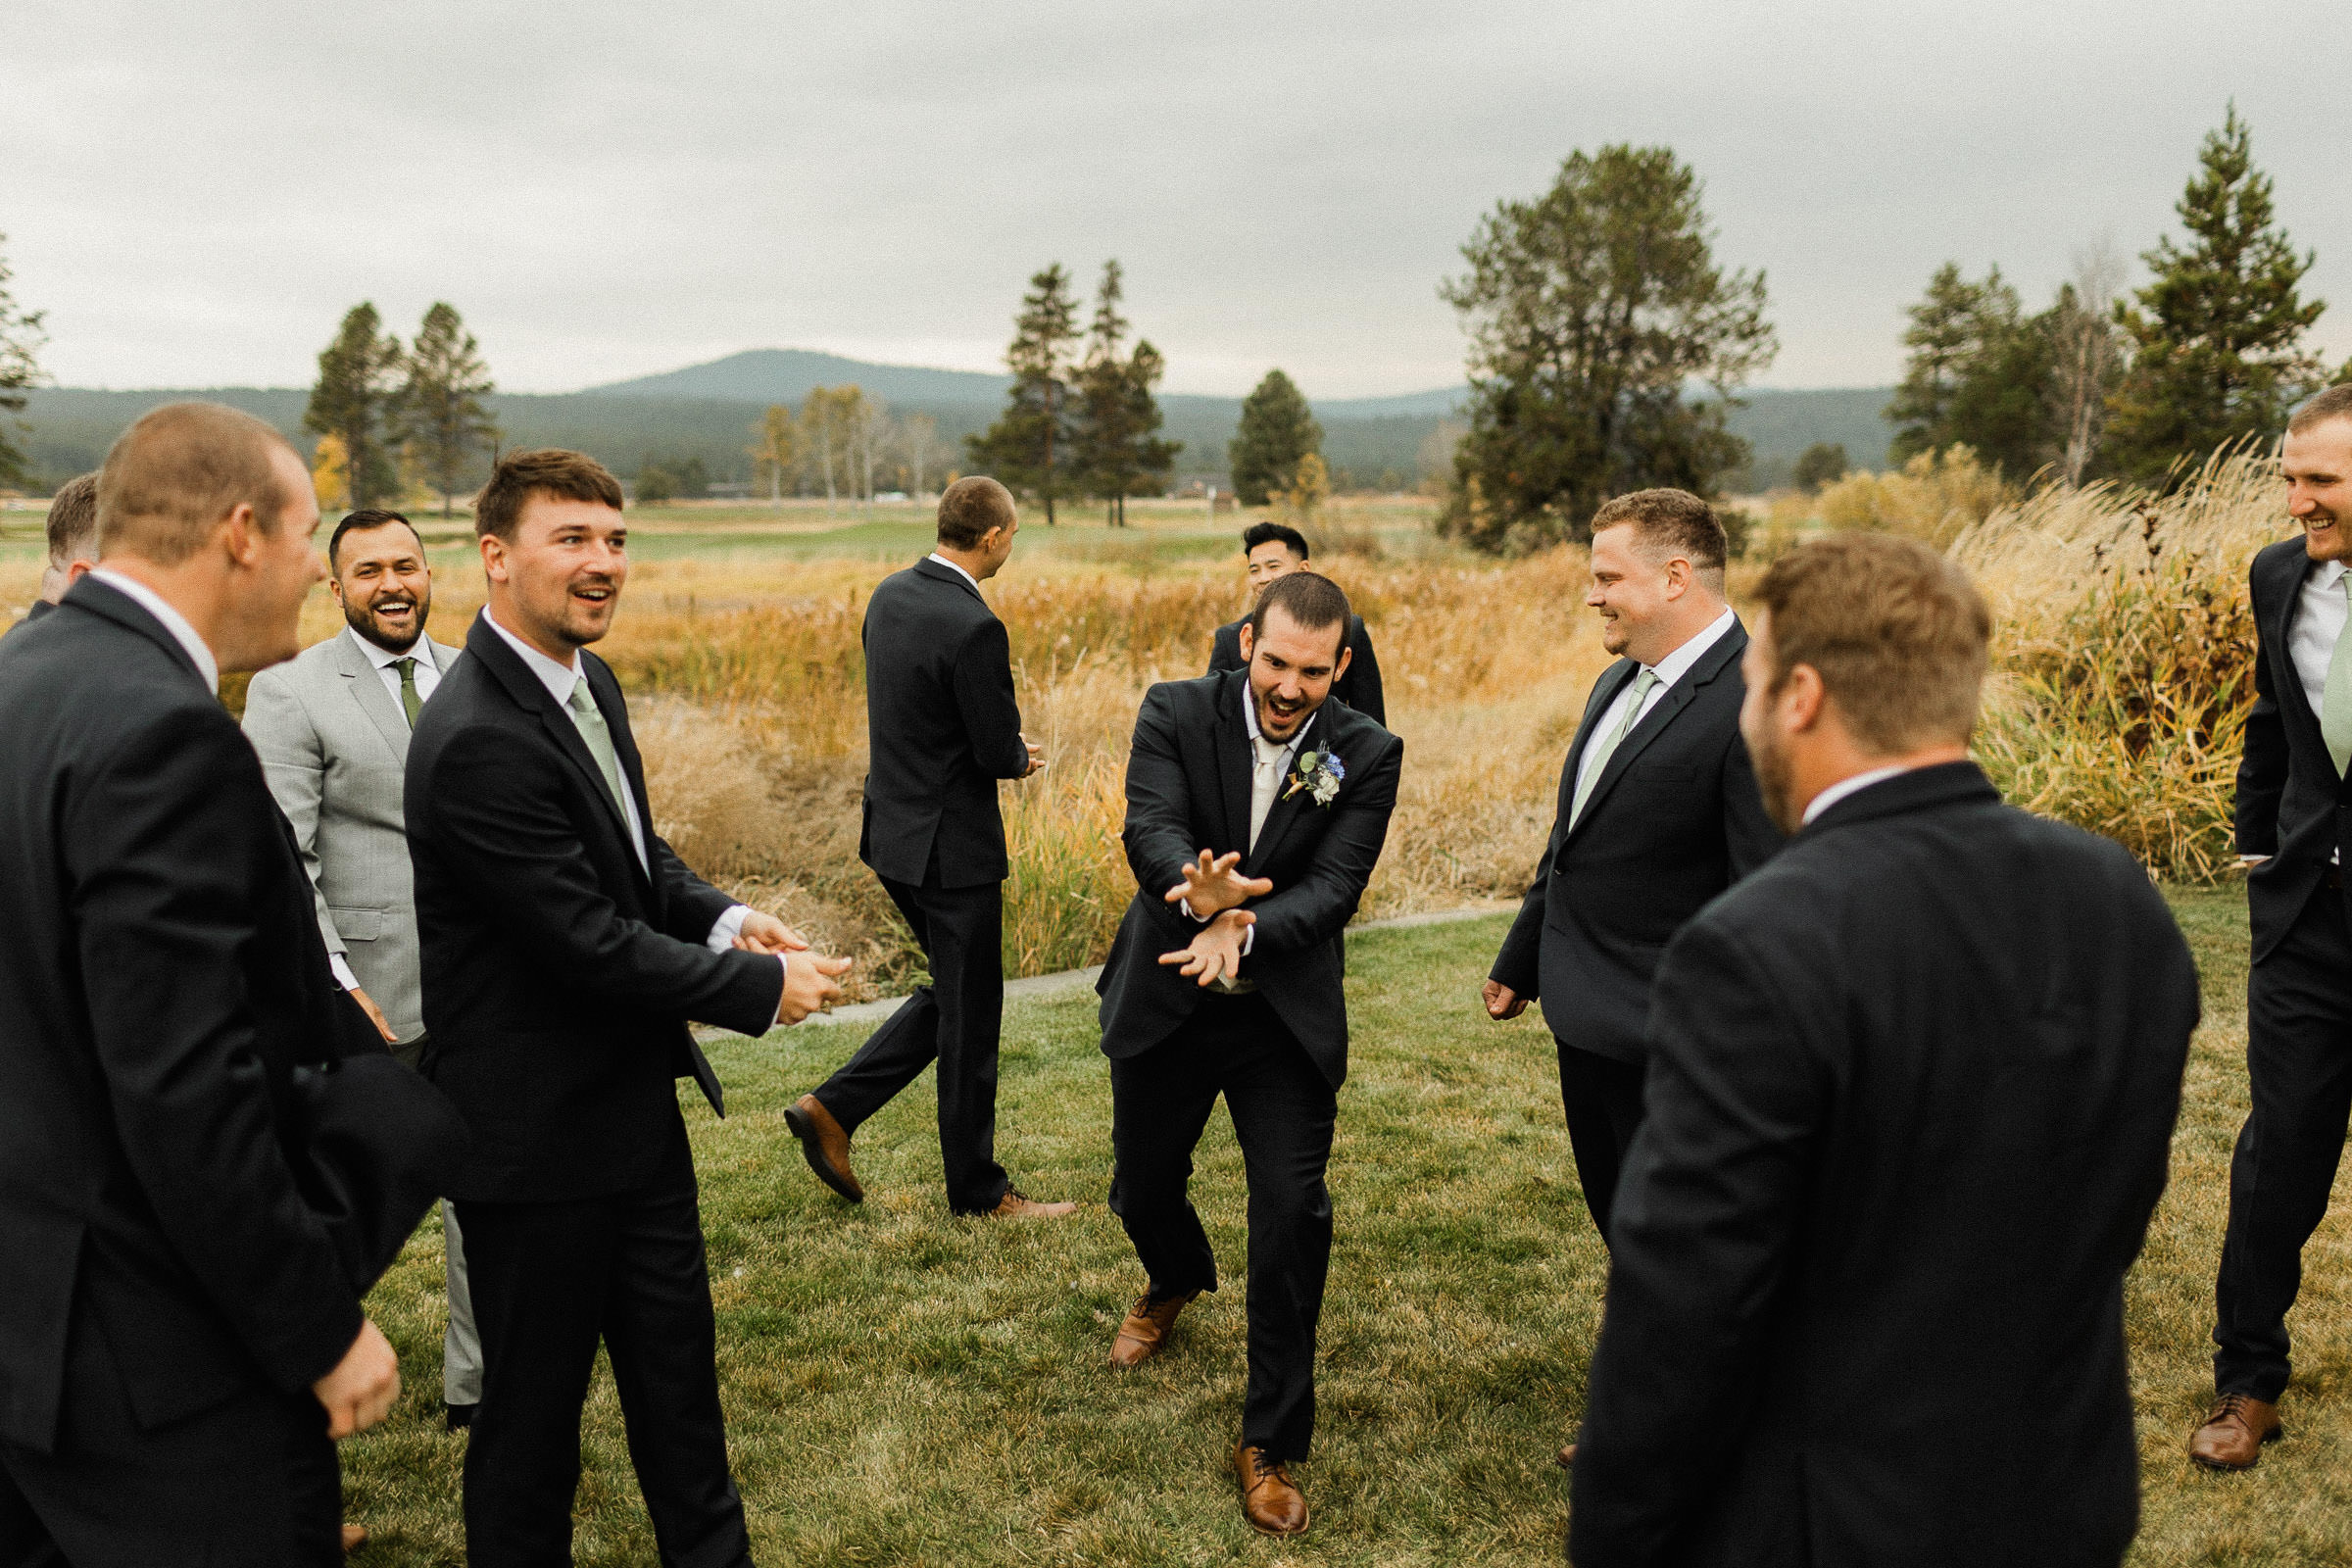 Groom and groomsmen gather and laugh on a lawn at Sunriver Resort